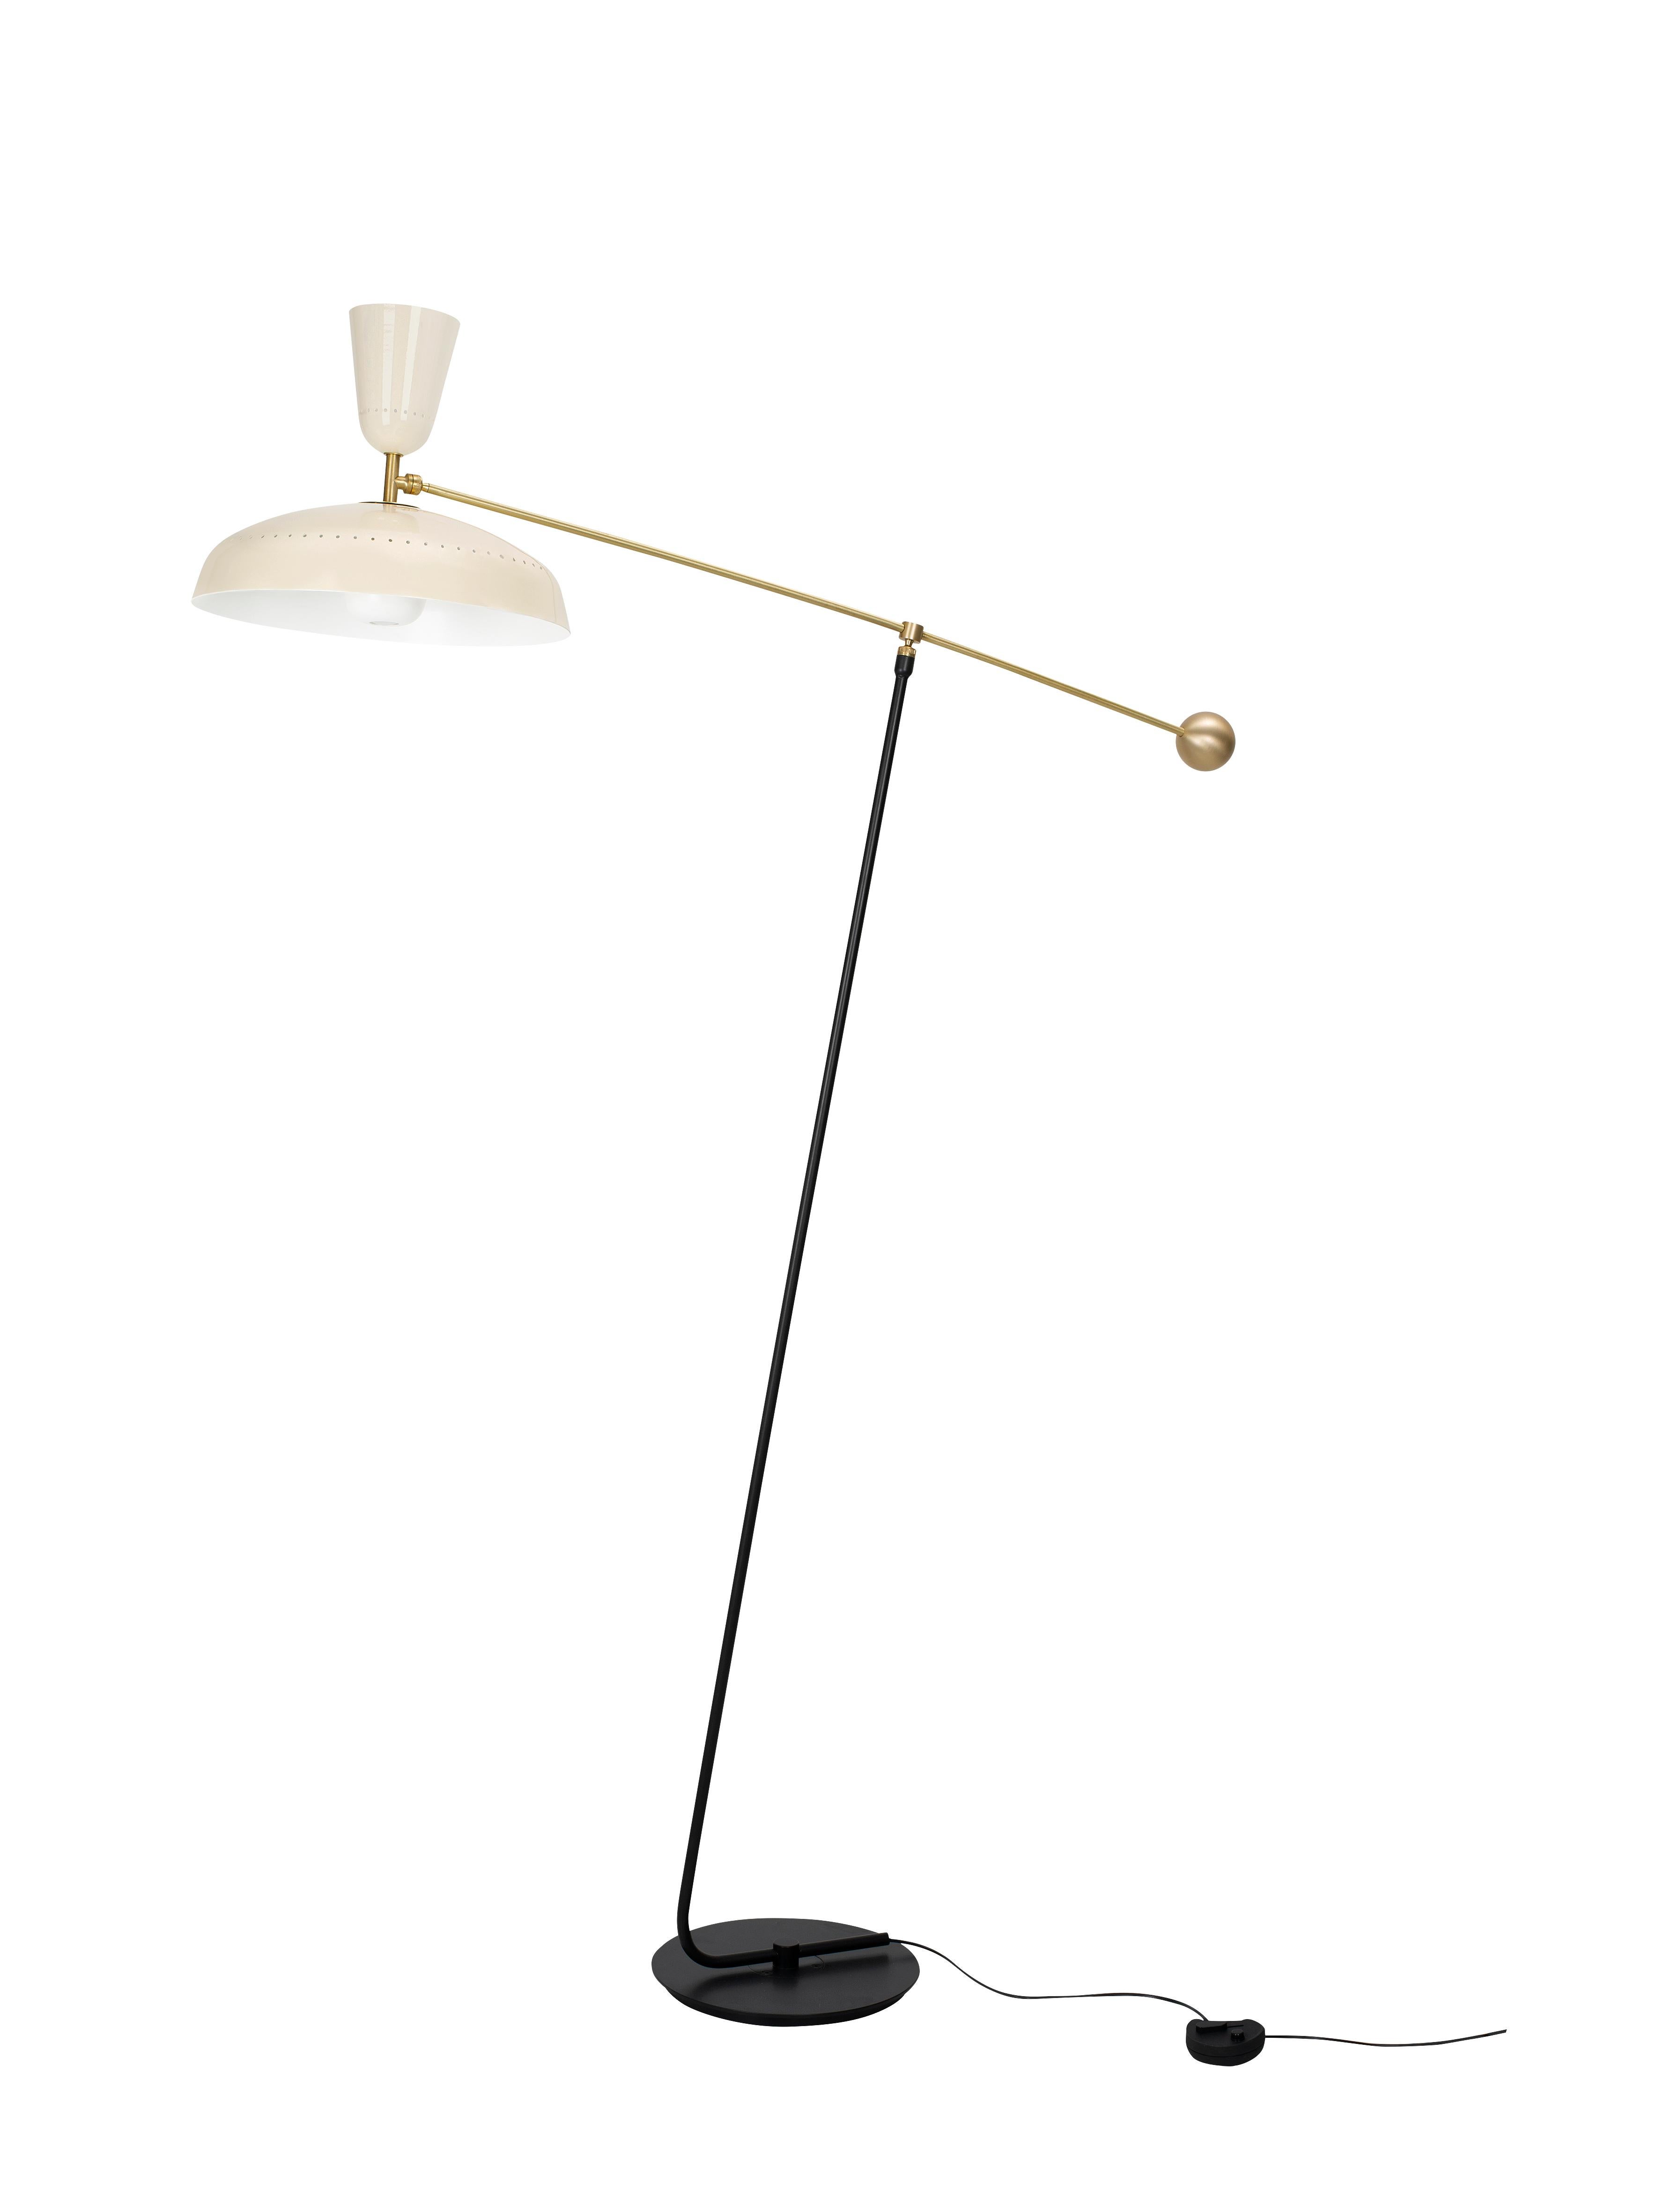 Large Pierre Guariche 'G1' Floor Lamp for Sammode Studio in Green For Sale 2